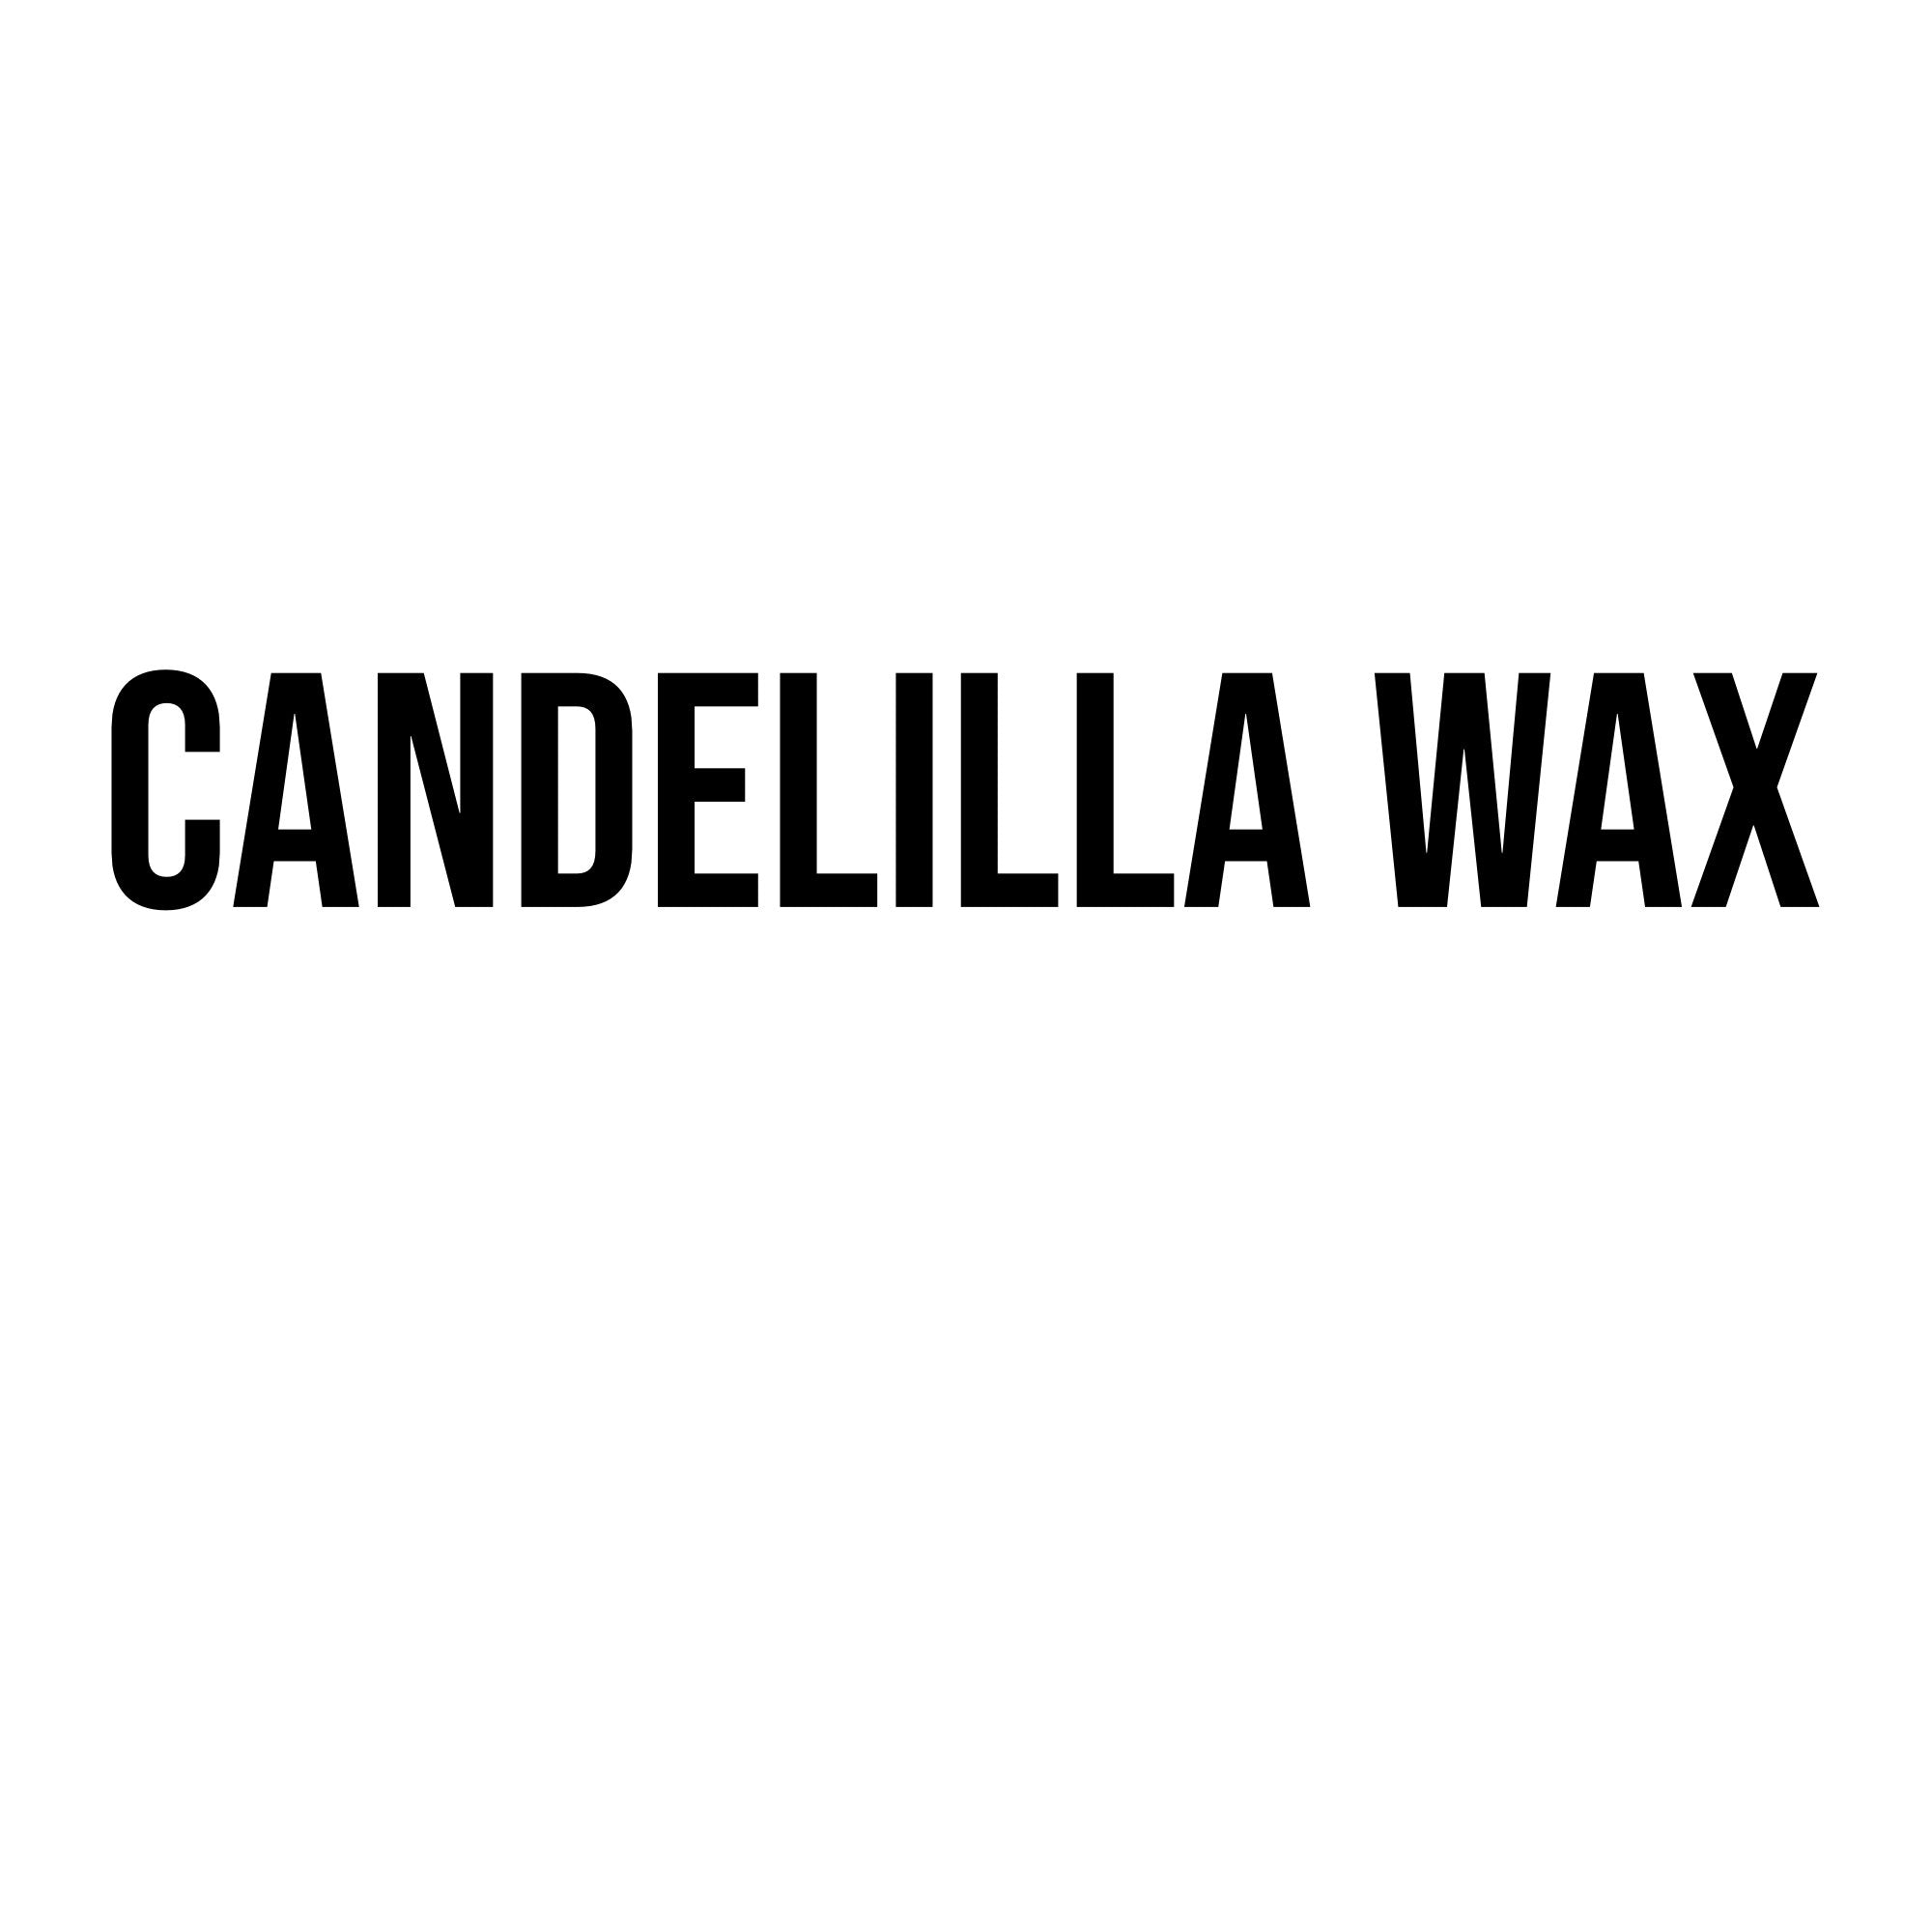 COSMOS-certified Candelilla wax